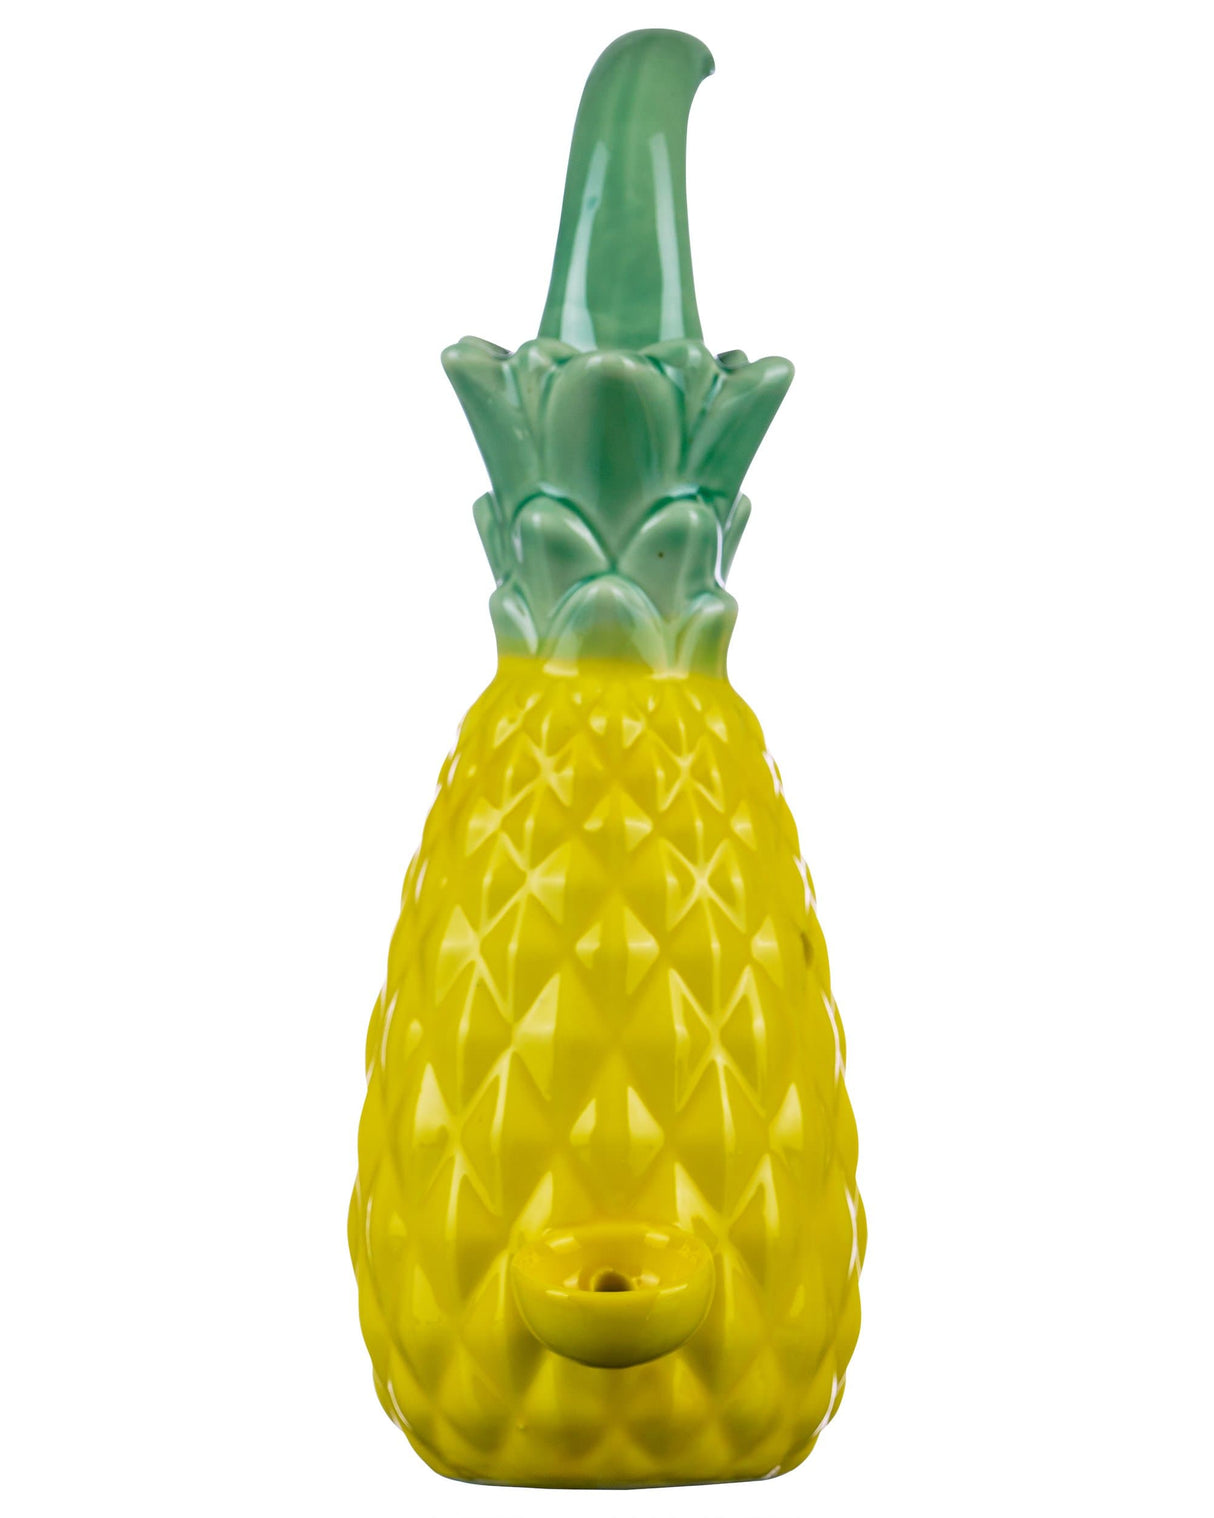 Roast & Toast Ceramic Pineapple Pipe, Yellow & Green, Fun Novelty Design, Front View